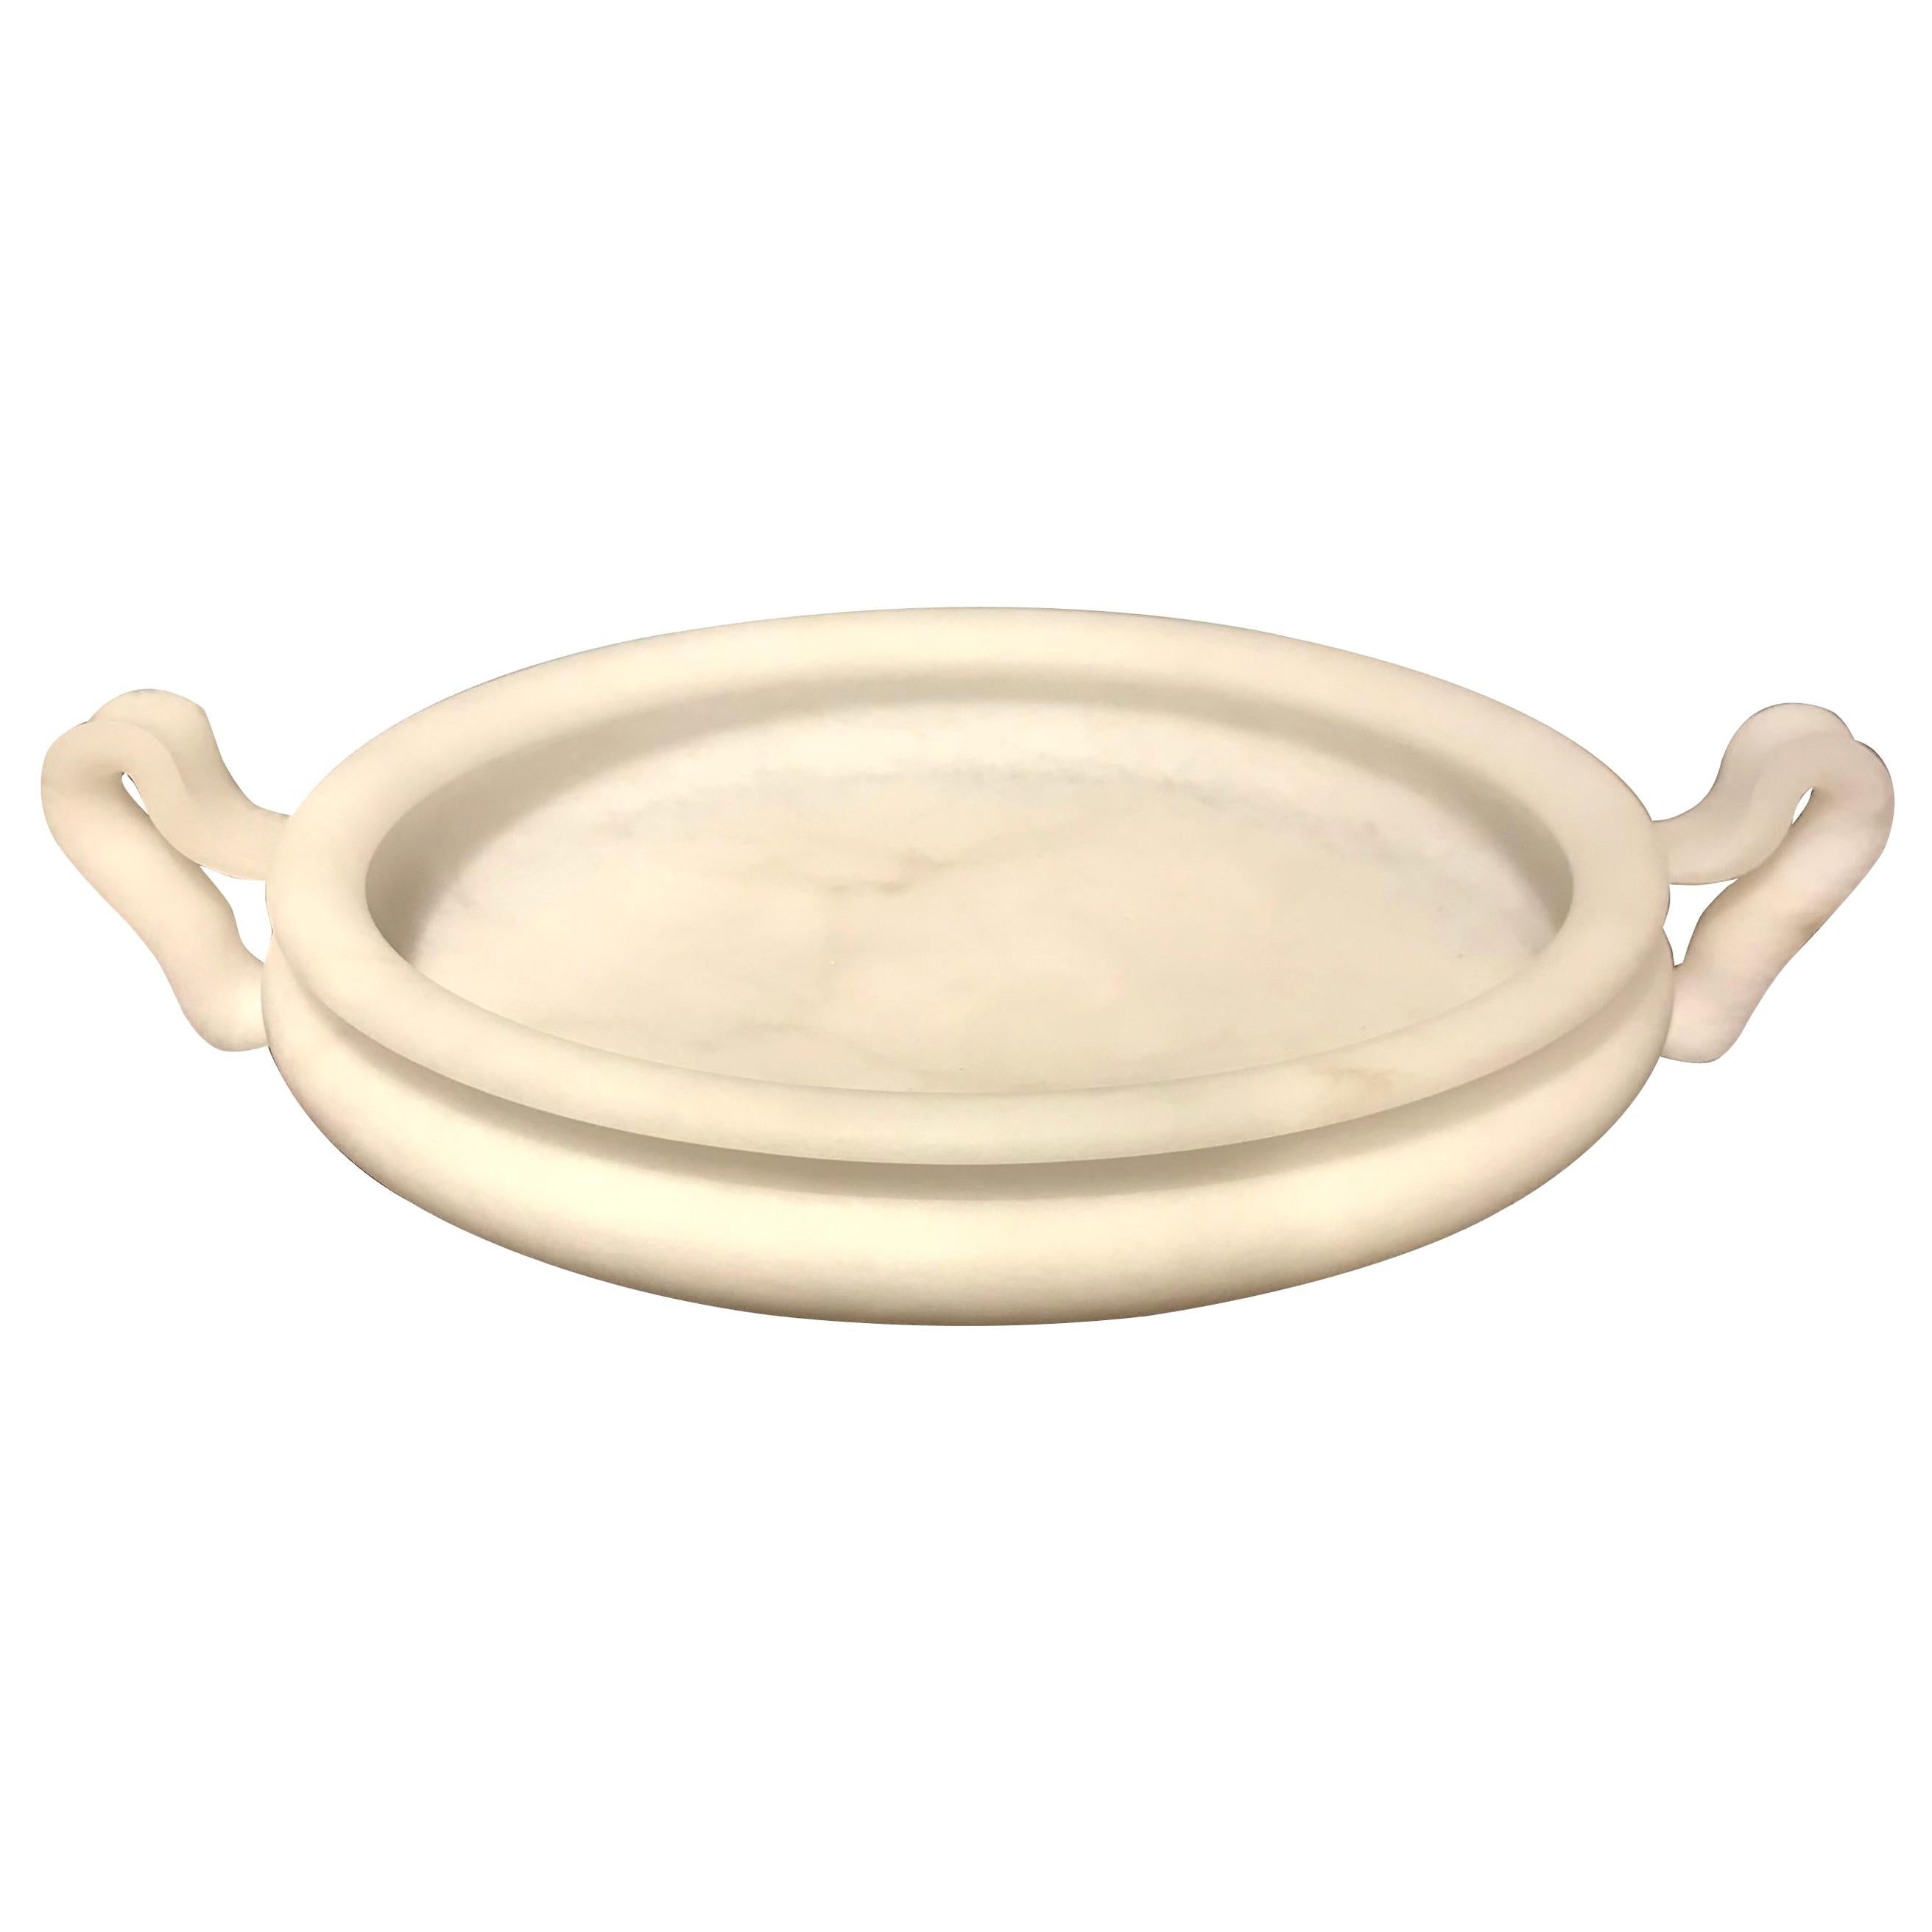 Round Cream Alabaster Bowl with Handles, Italy, Contemporary